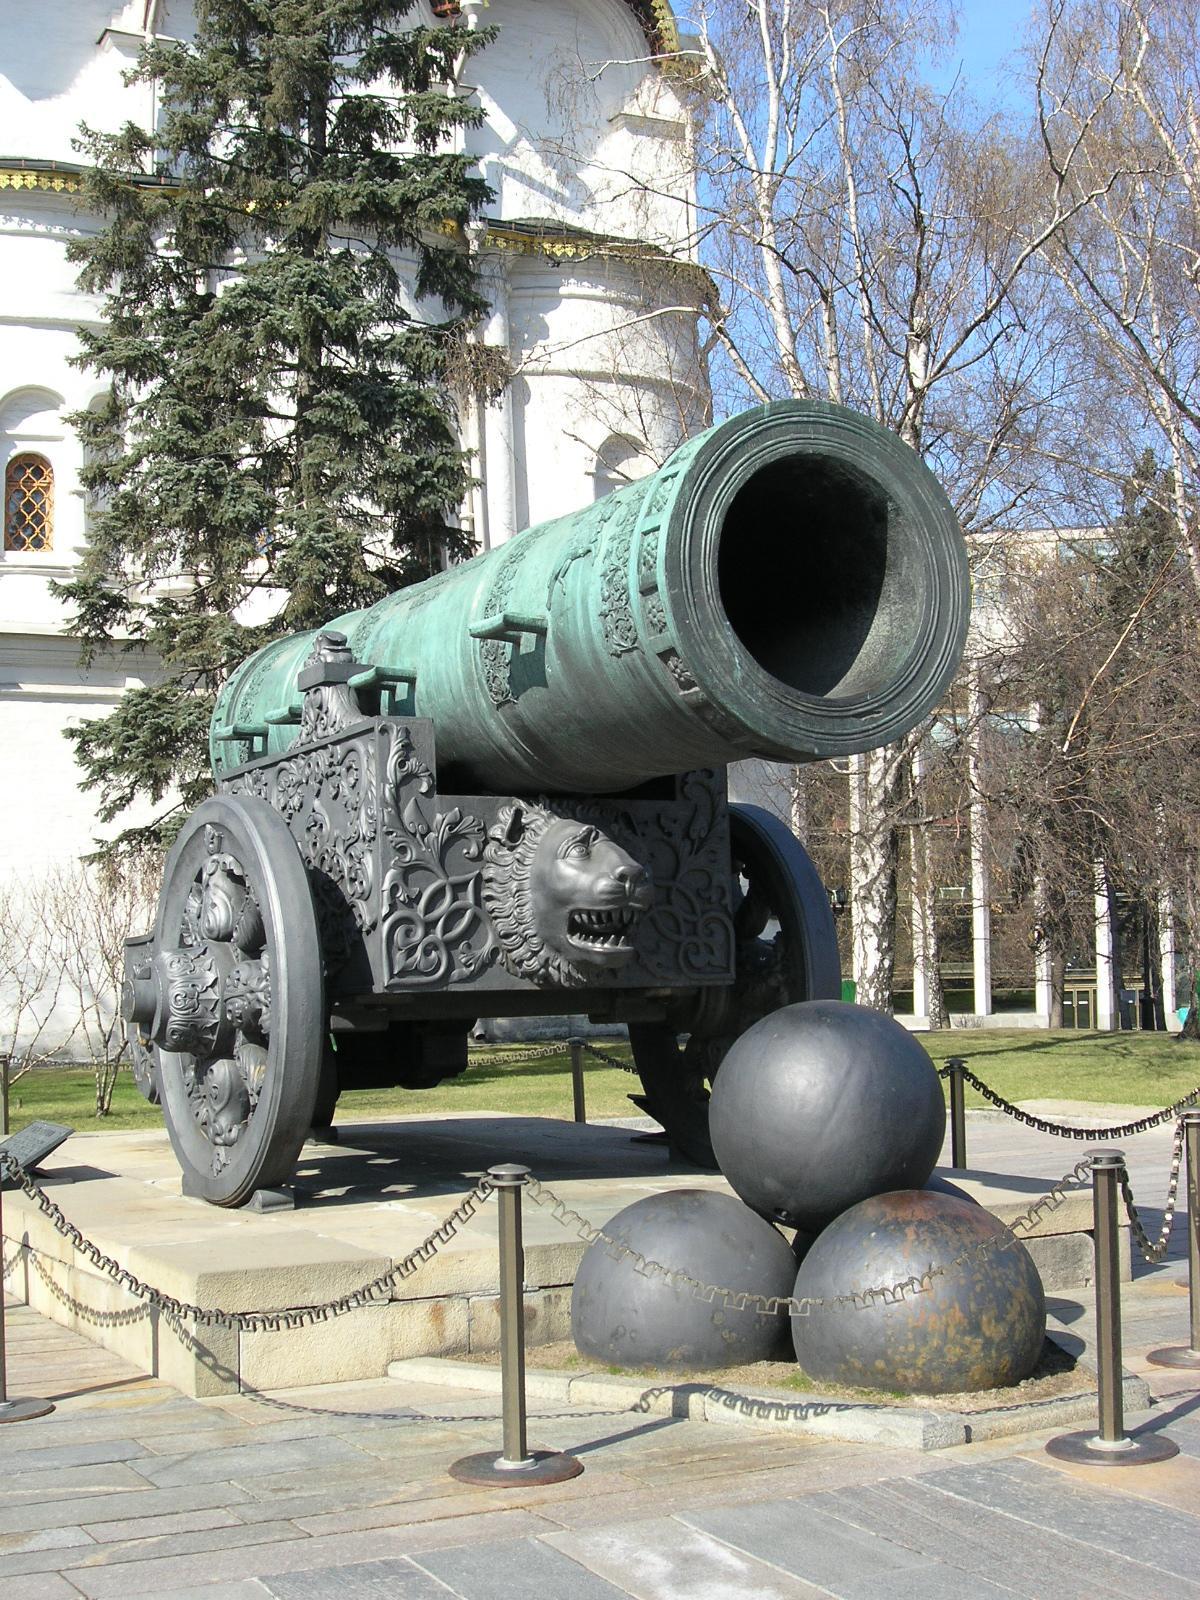 two large balls and a large cannon on display in front of the palace